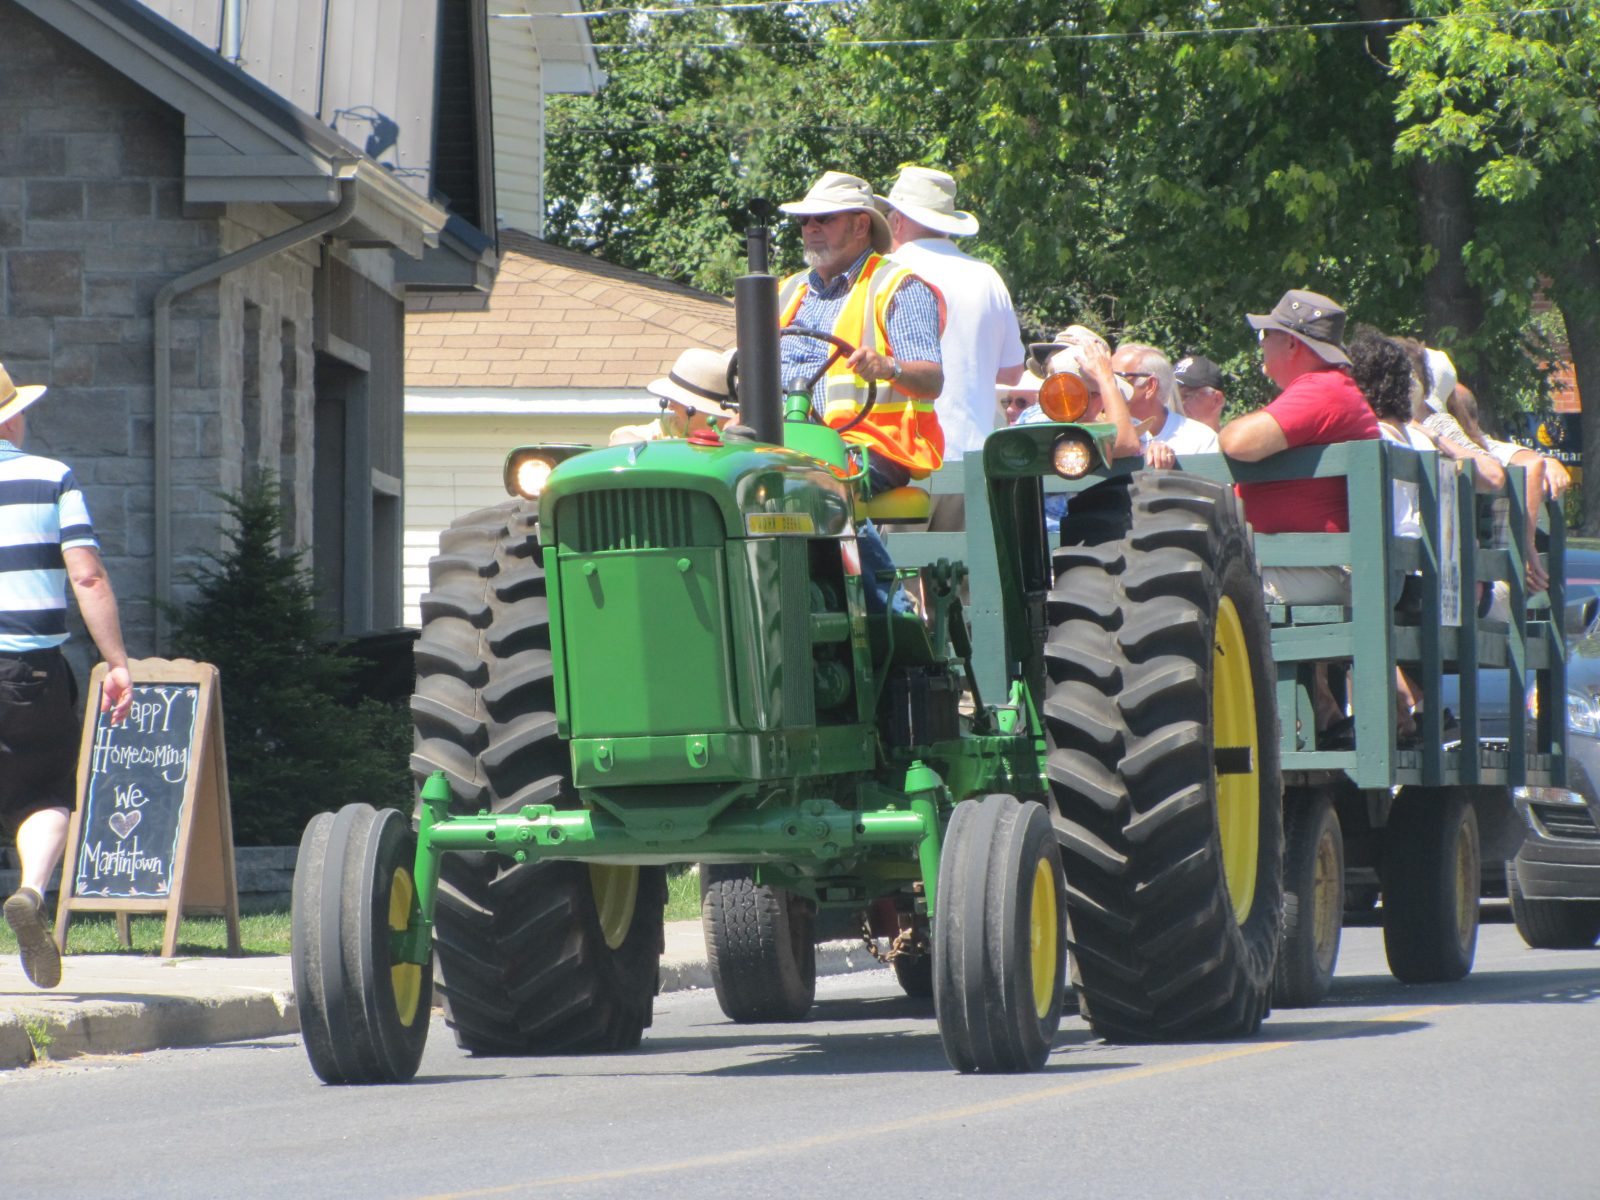 Martintown’s homecoming may become an annual event